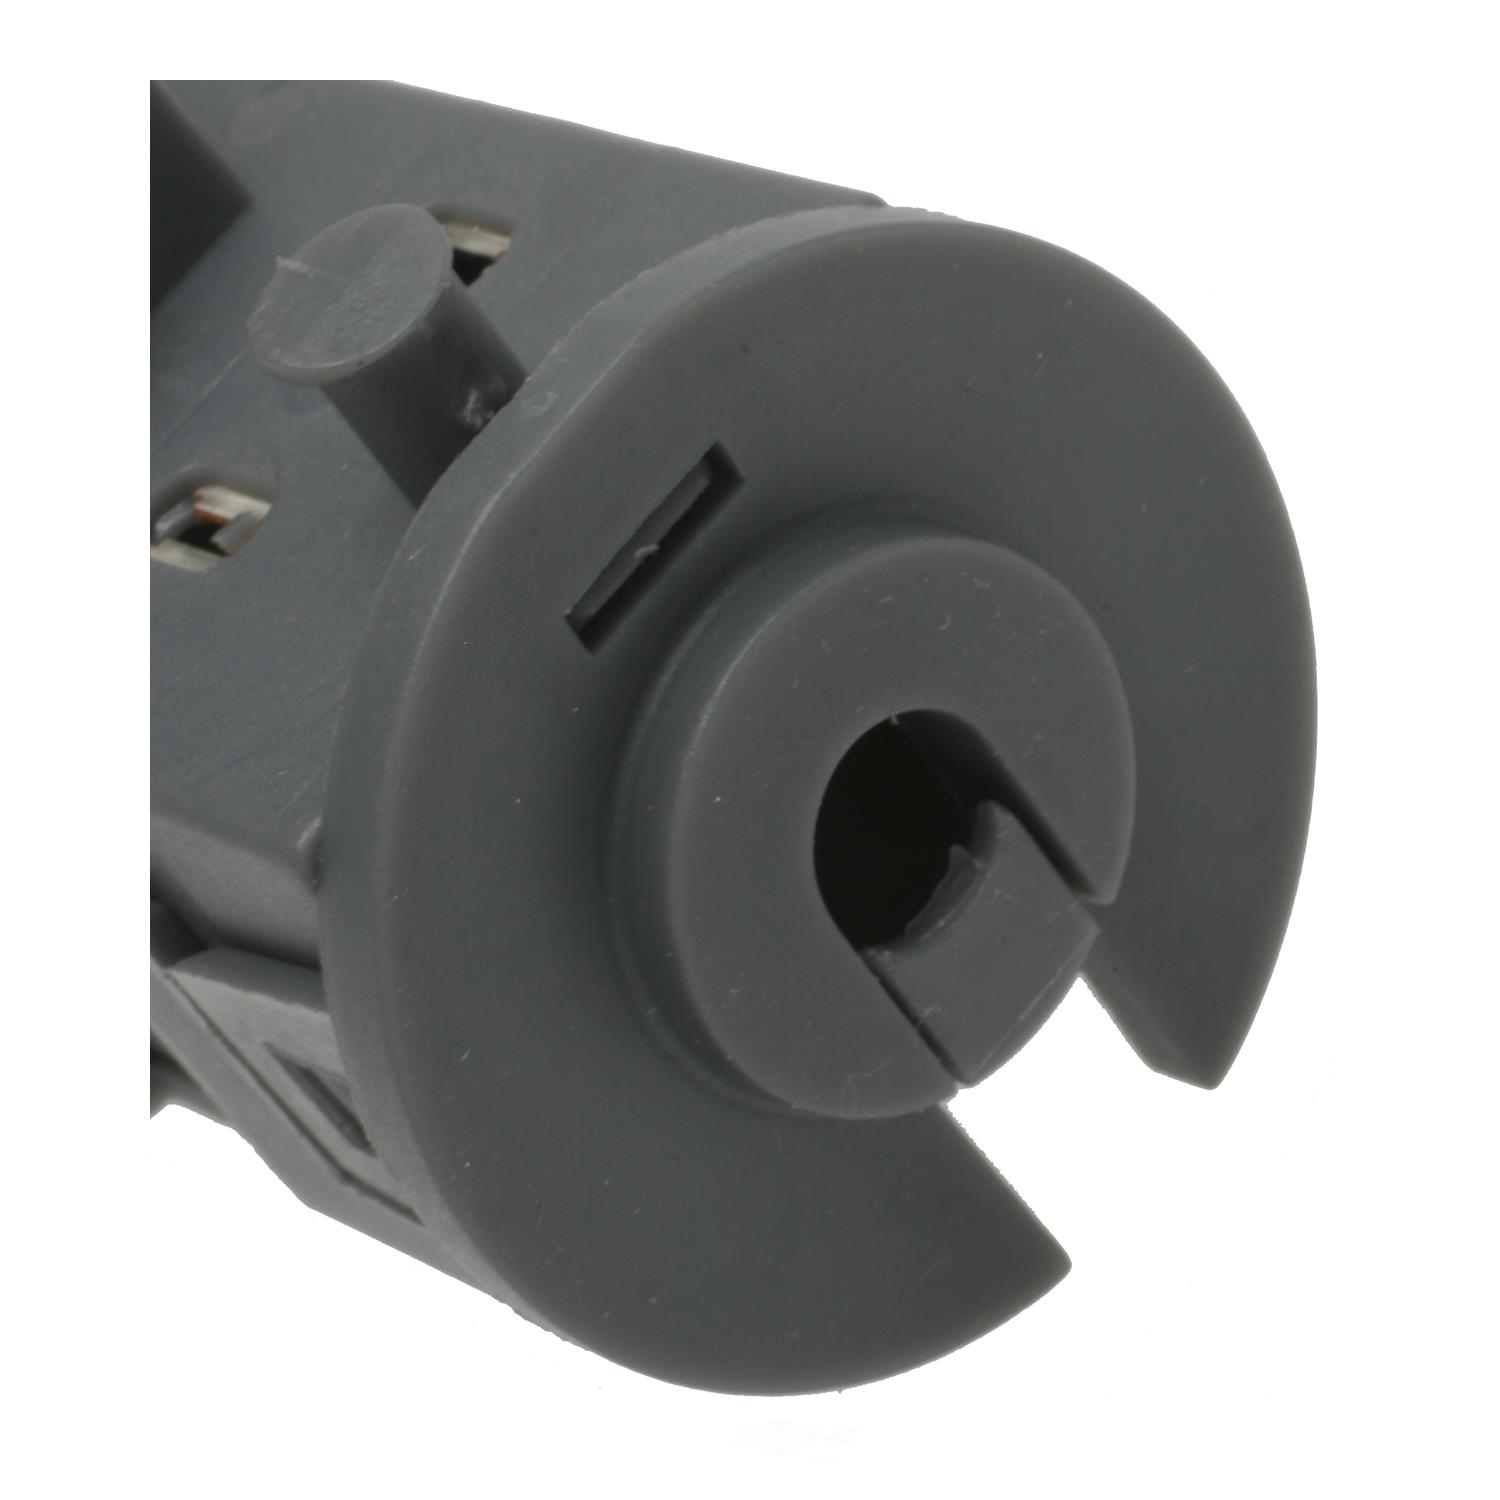 STANDARD T-SERIES - Cruise Control Release Switch - STT NS127T